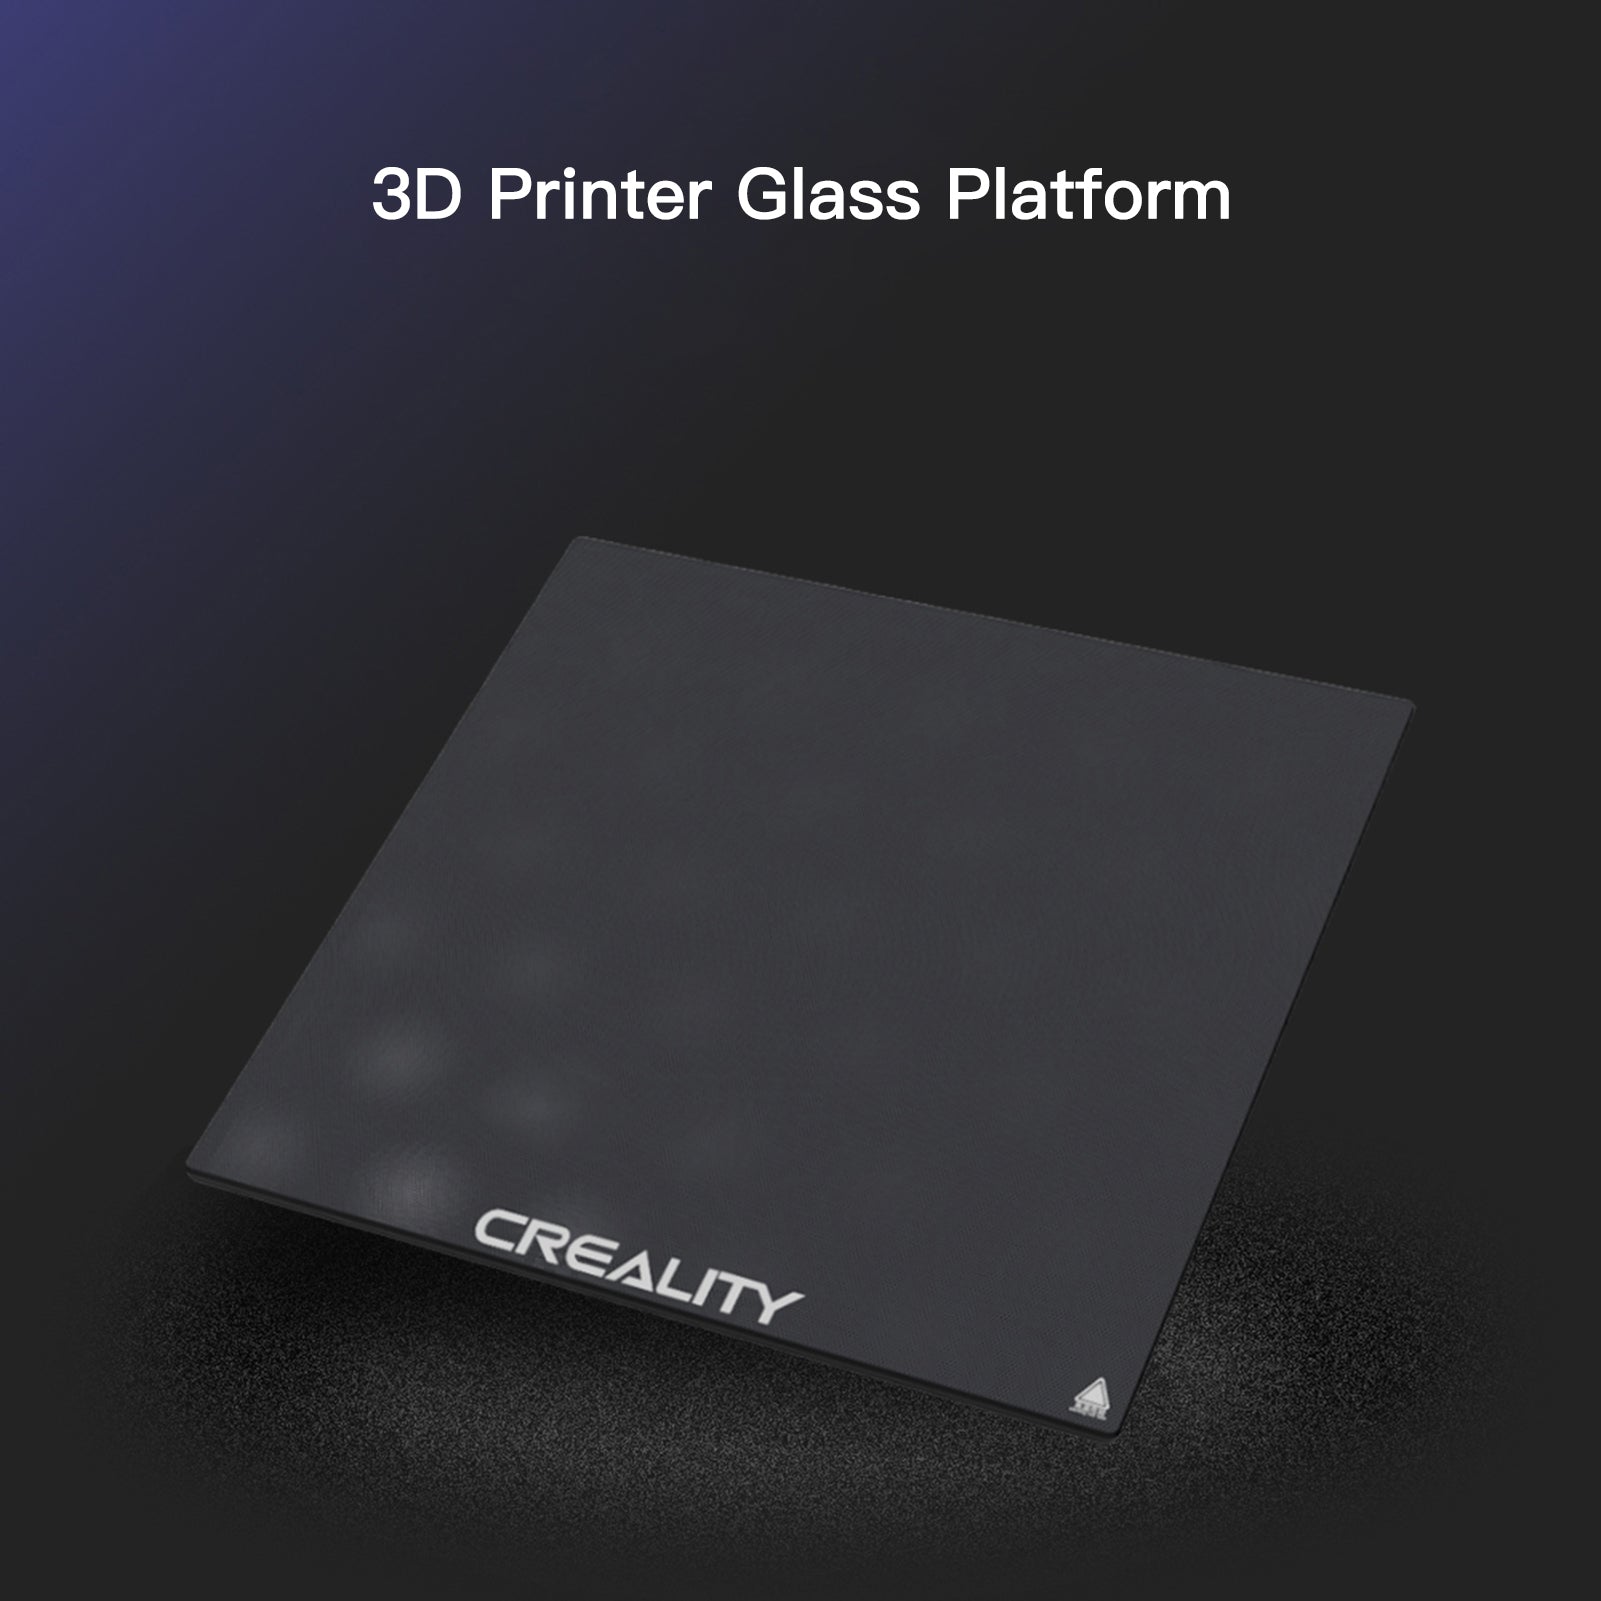 Creality Tempered Glass Bed for 3D Printer Platform Heated Plate Build Surface 310*310mm with 4pcs Glass Clip 4mm Ultrabase 3D Printer Accessories